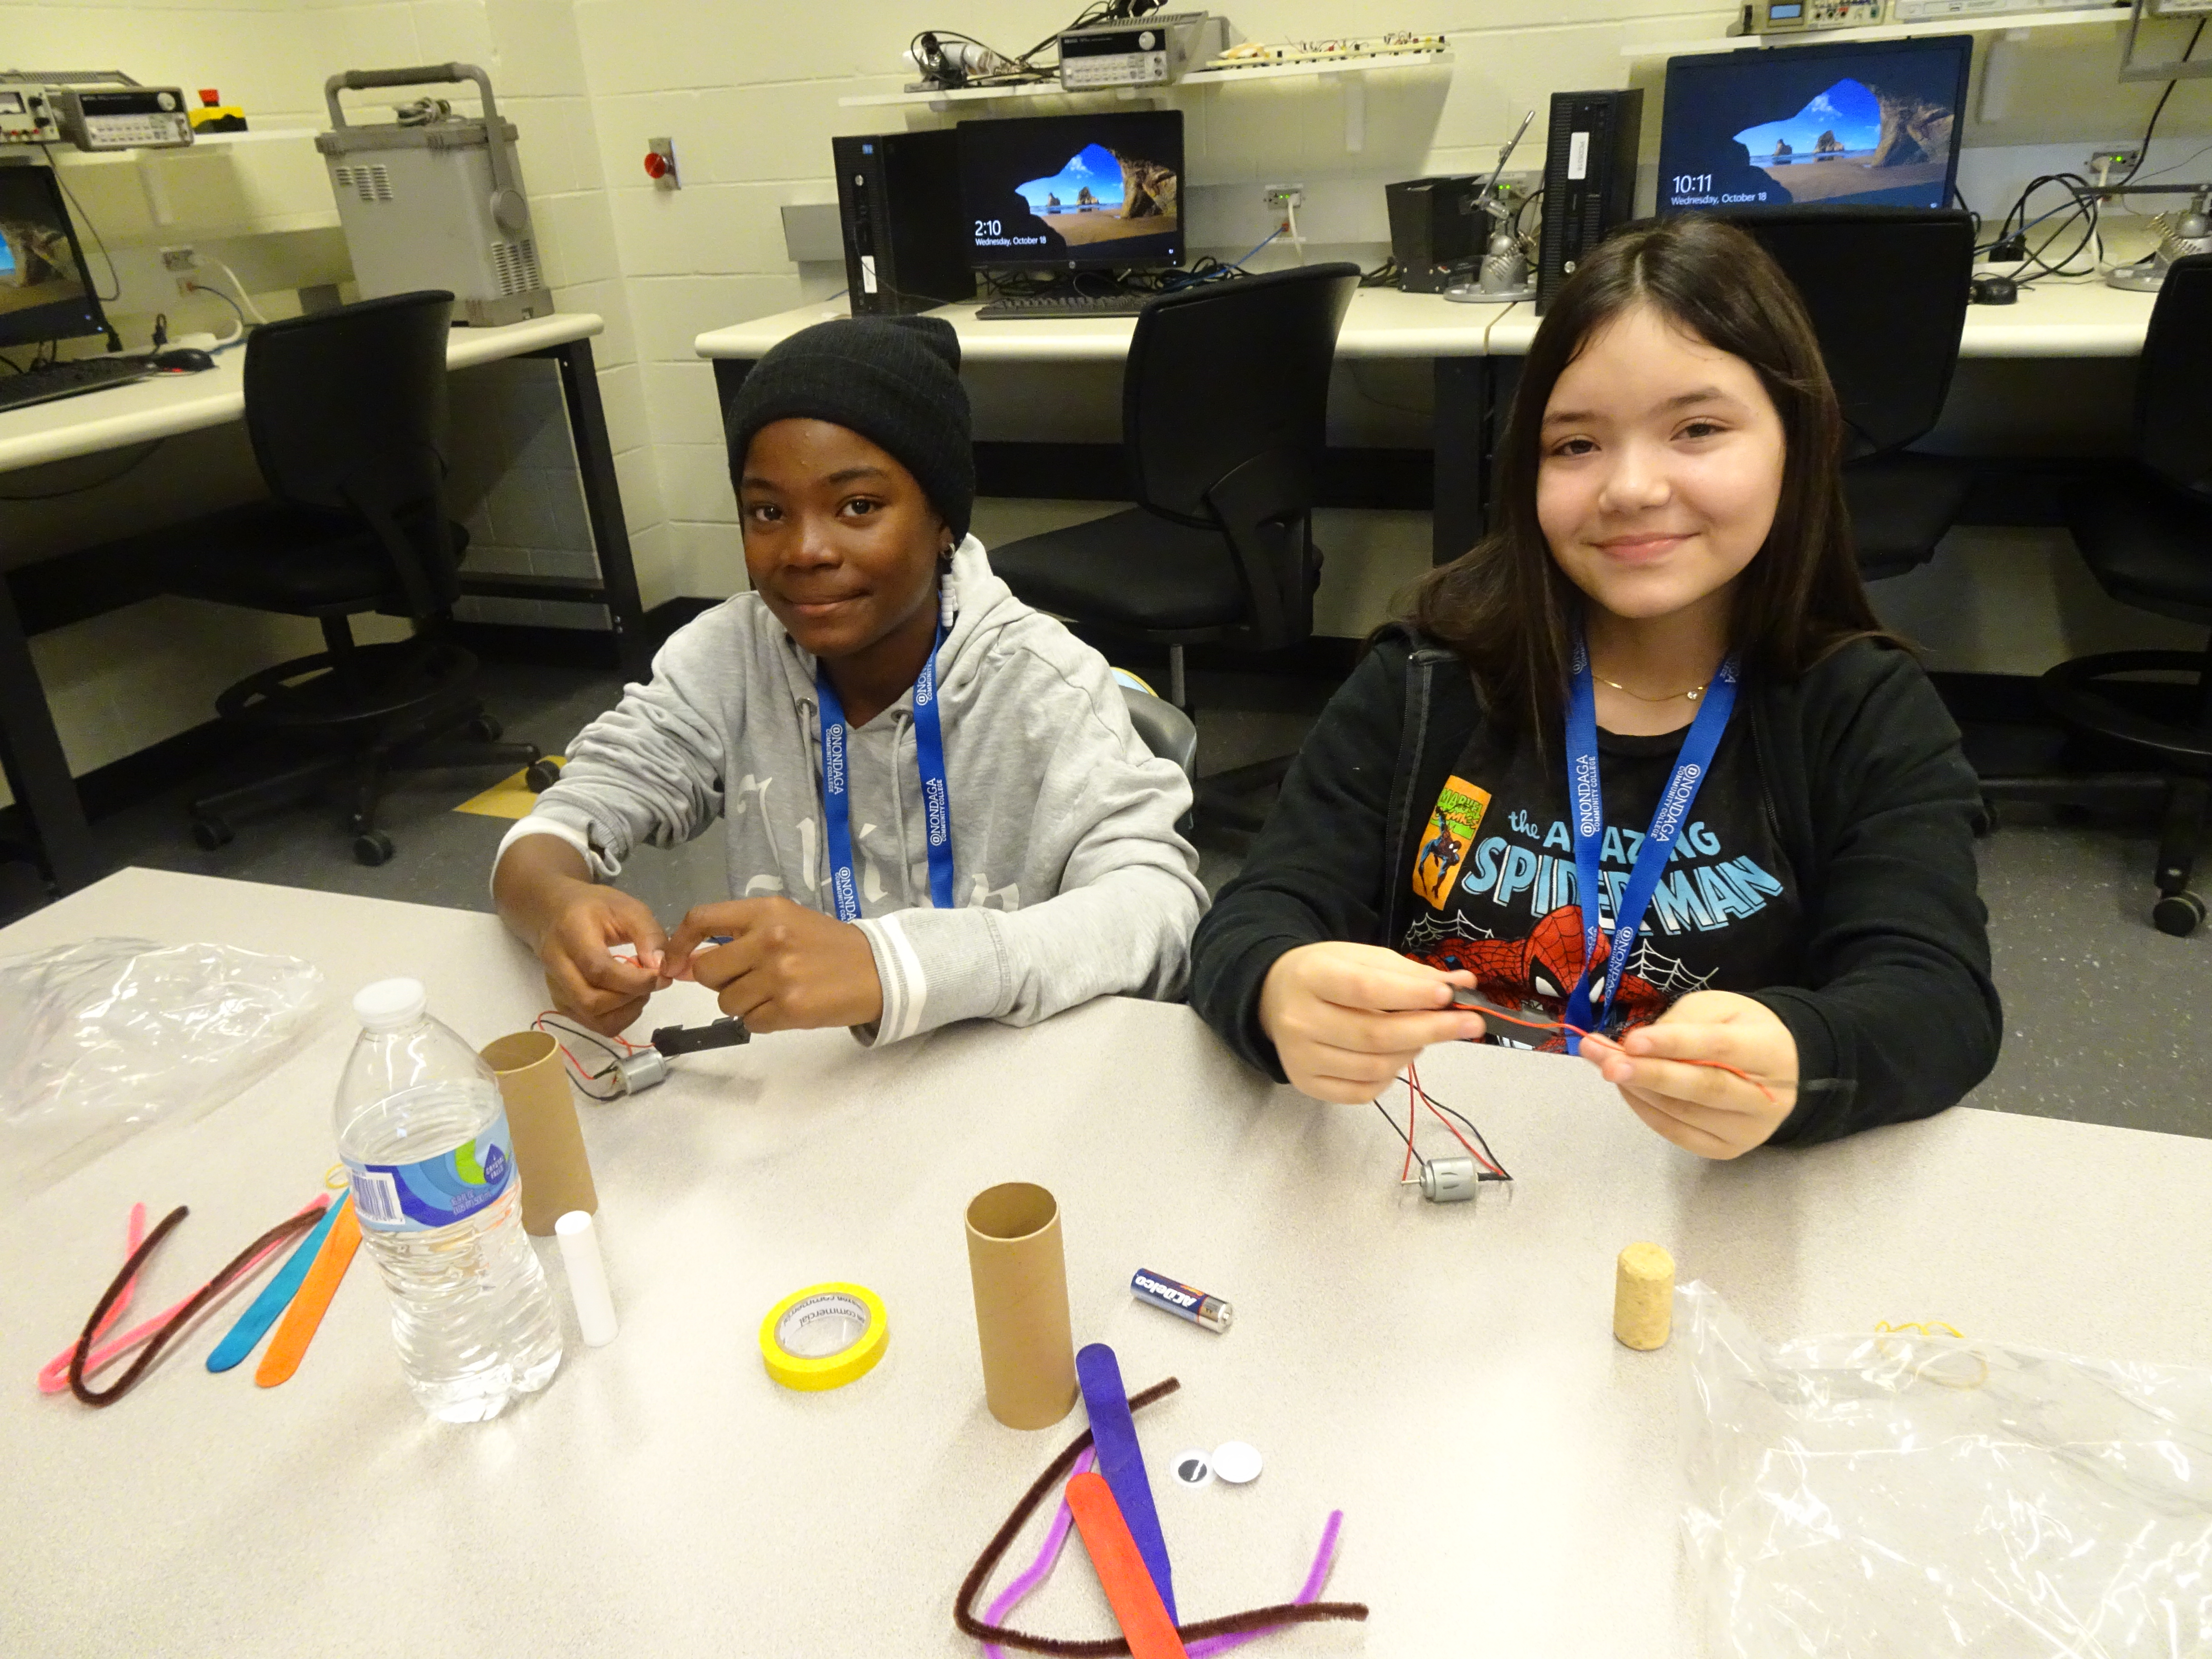 This is a photo of two middle school girls sitting at a desk working on building wiggle robots and smiling at the camera.